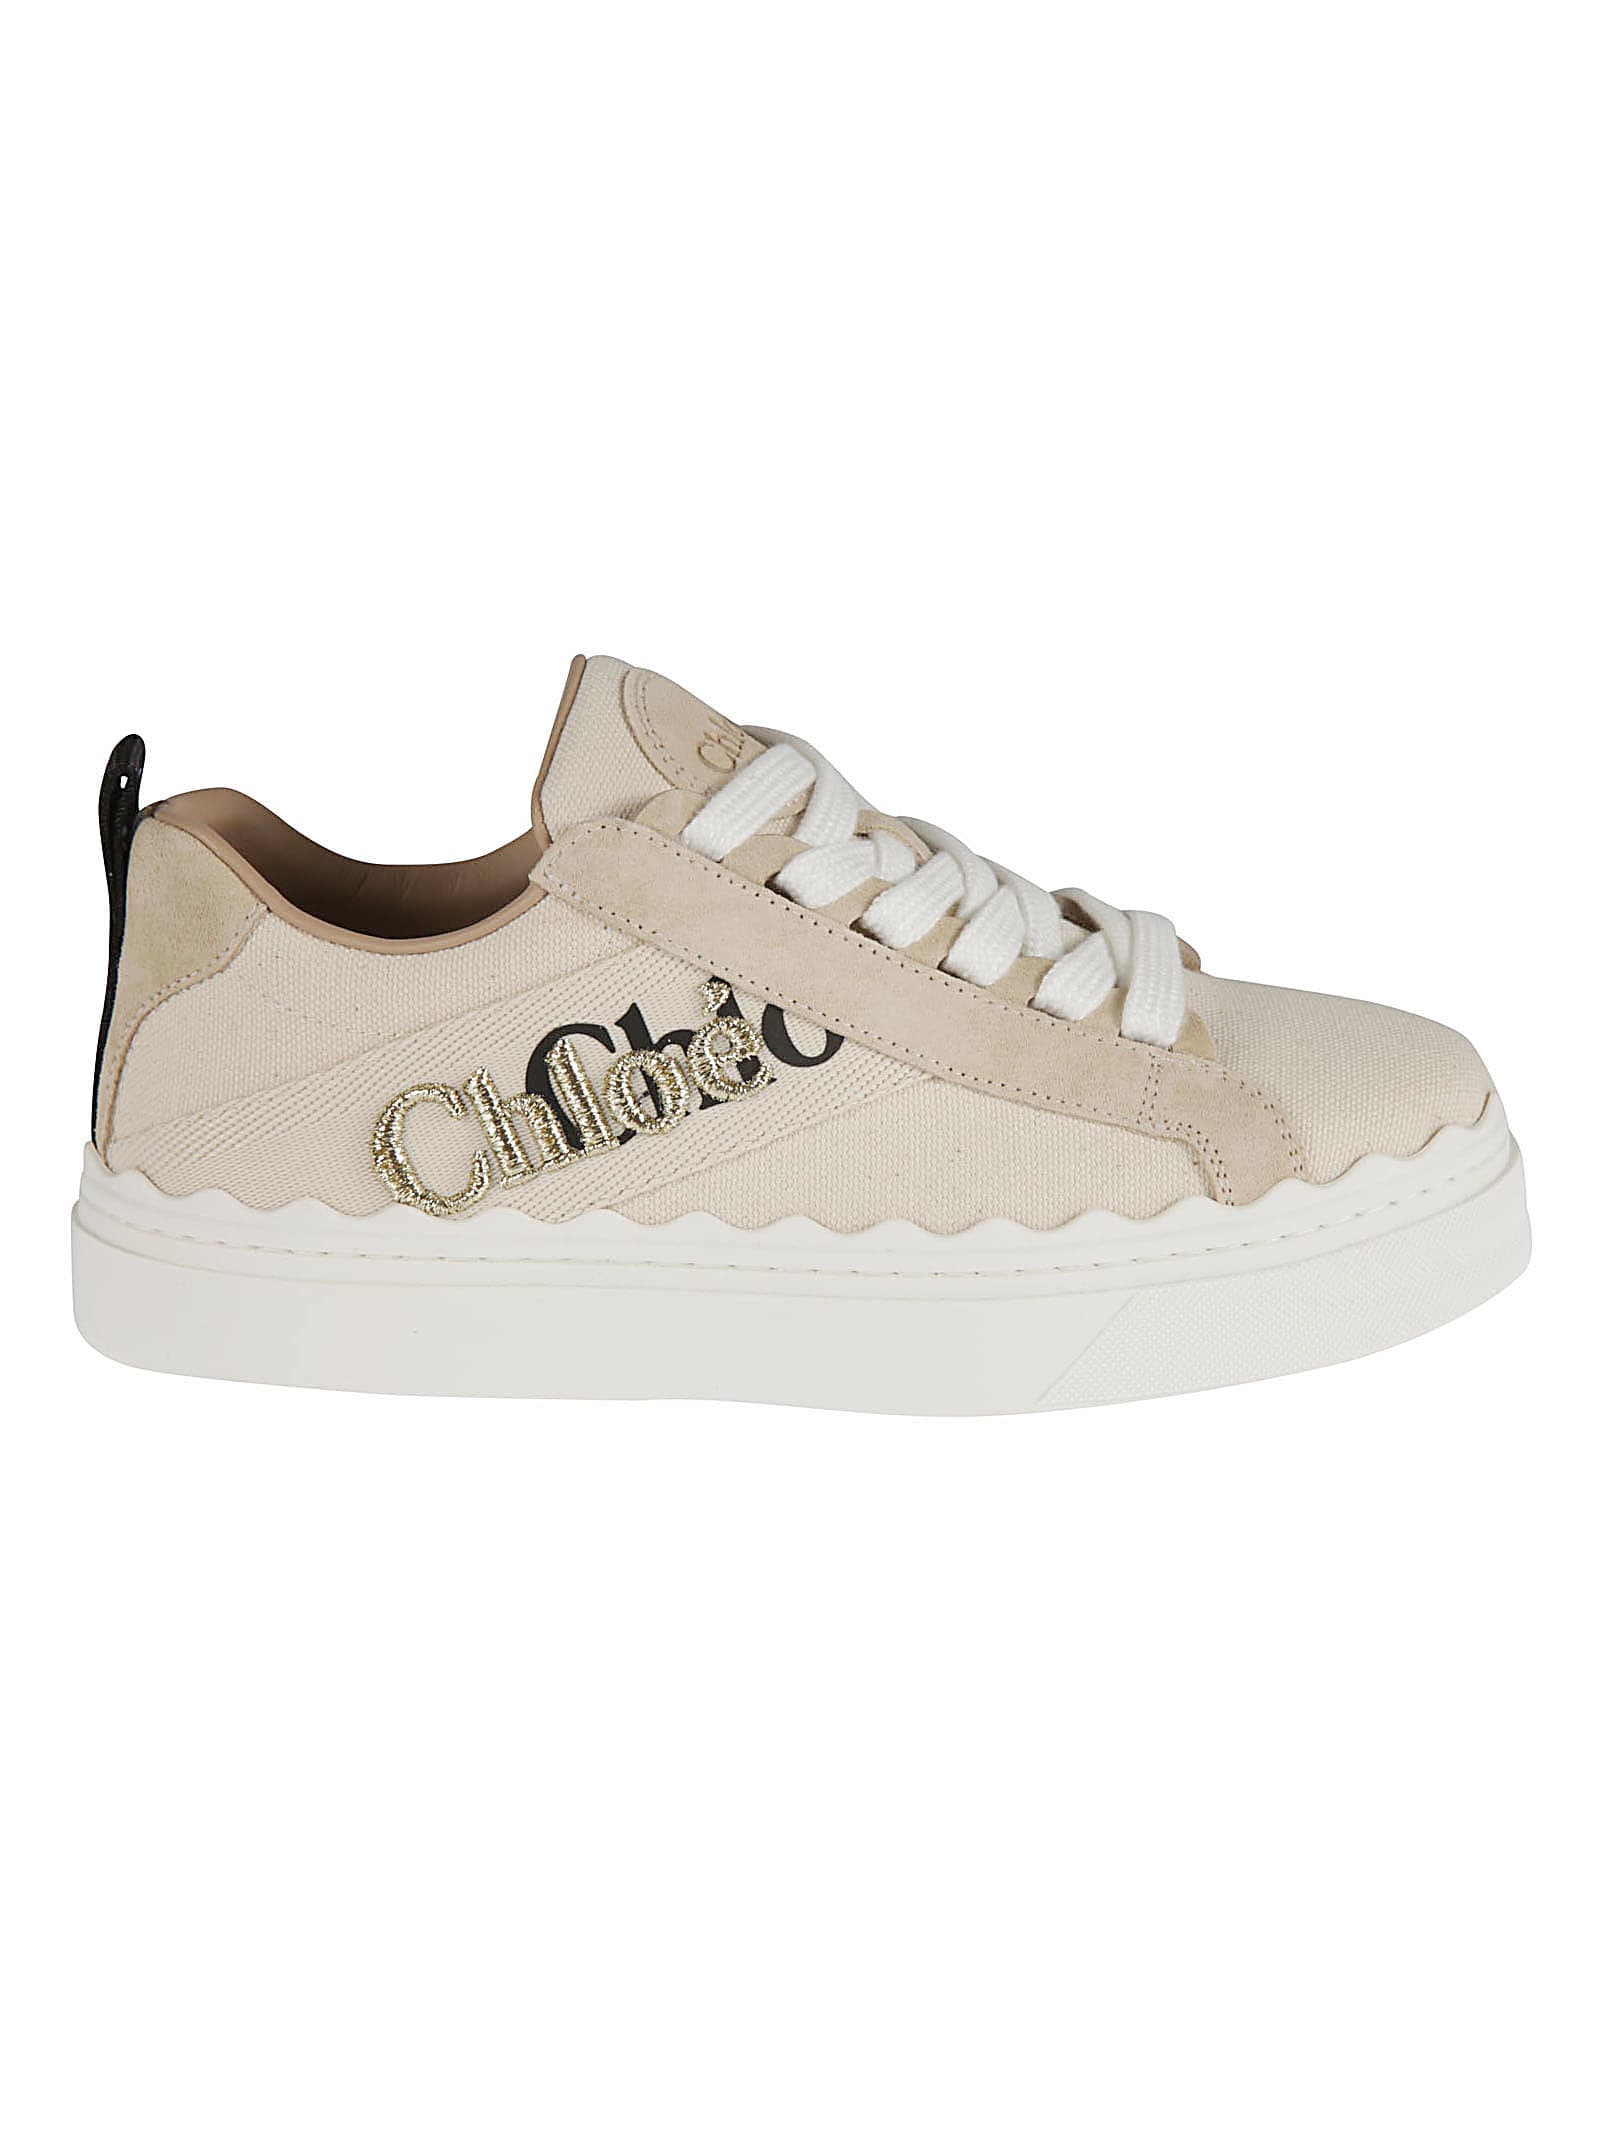 CHLOÉ EMBROIDERED LOGO SNEAKERS,C21U10 8Q7101